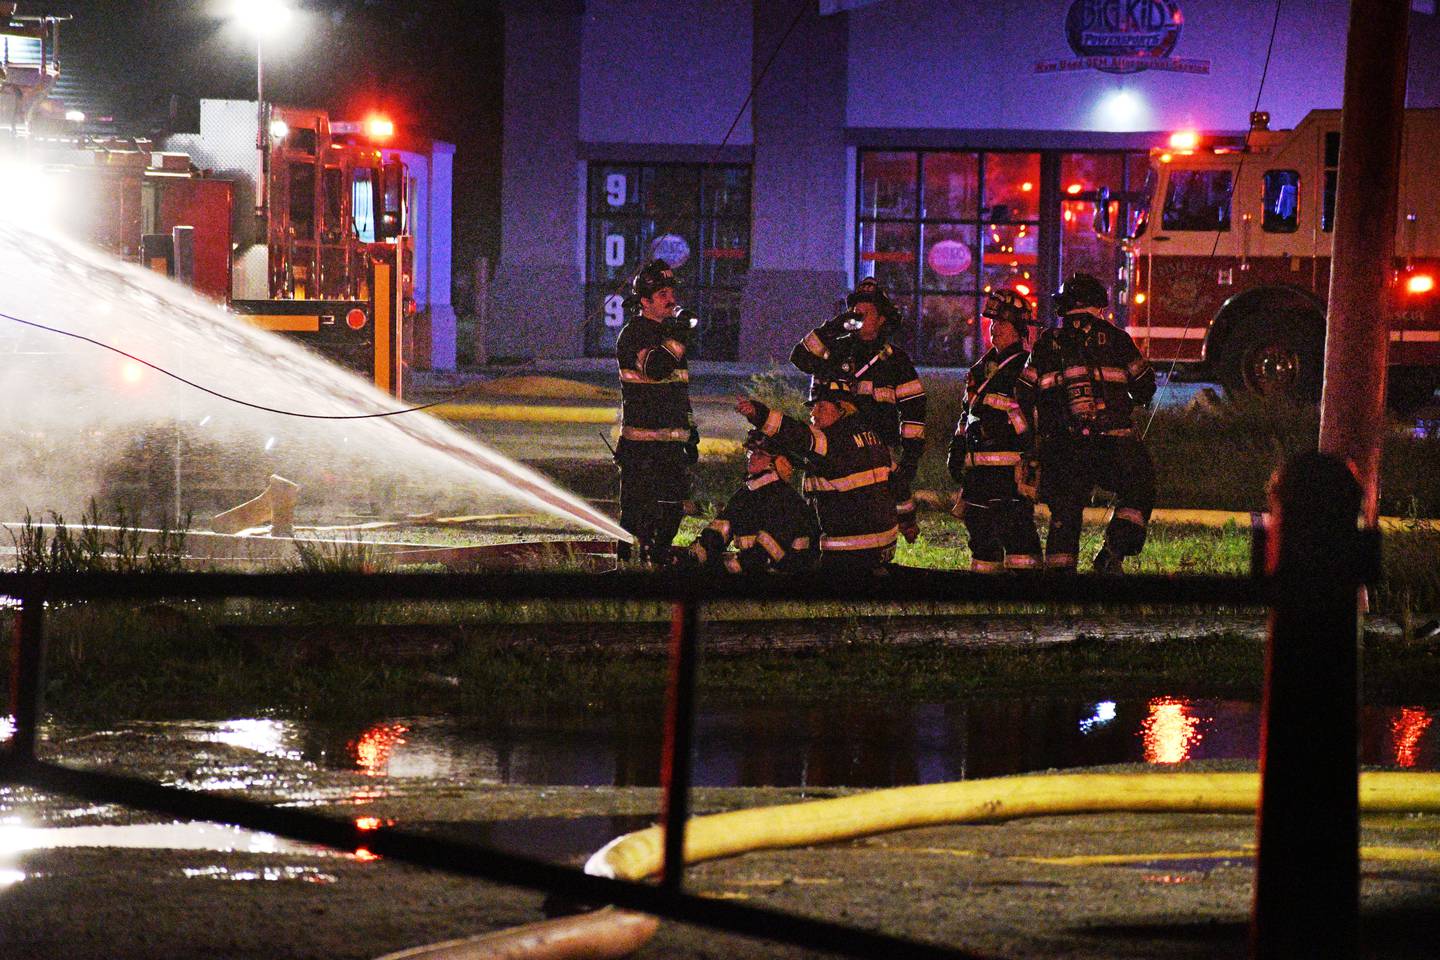 A "suspicious" fire overnight Thursday, May 27, 2021, into Friday at the former roller rink in McHenry left the building a total loss, fire officials said. The fire remains under investigation.